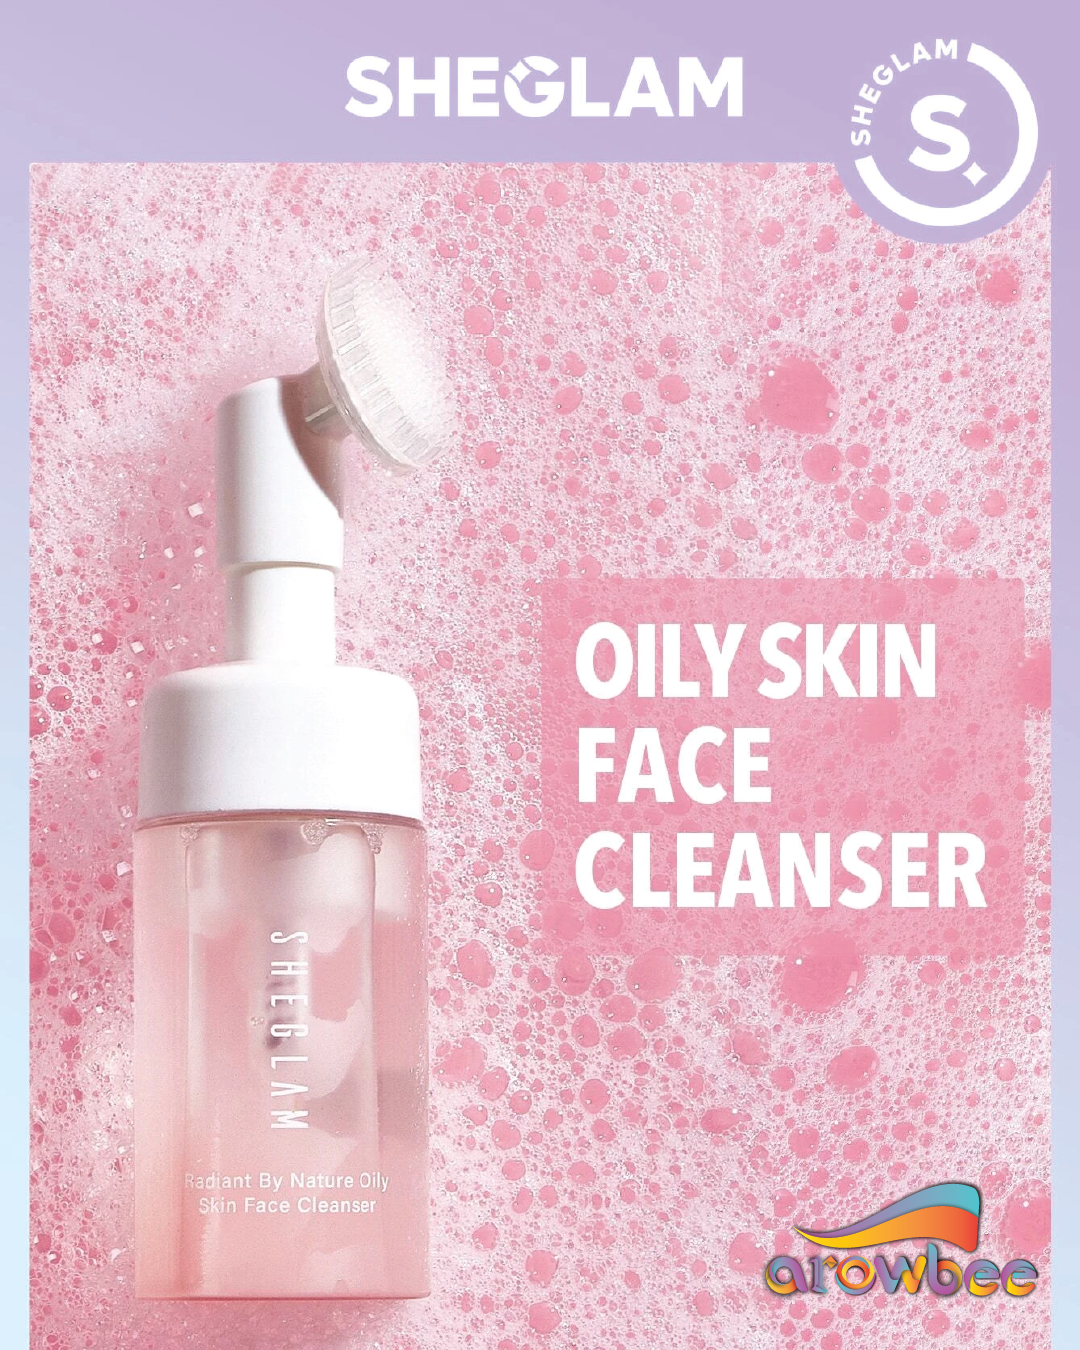 SHEGLAM Radiant By Nature Oily Skin Face Cleanser 100ml